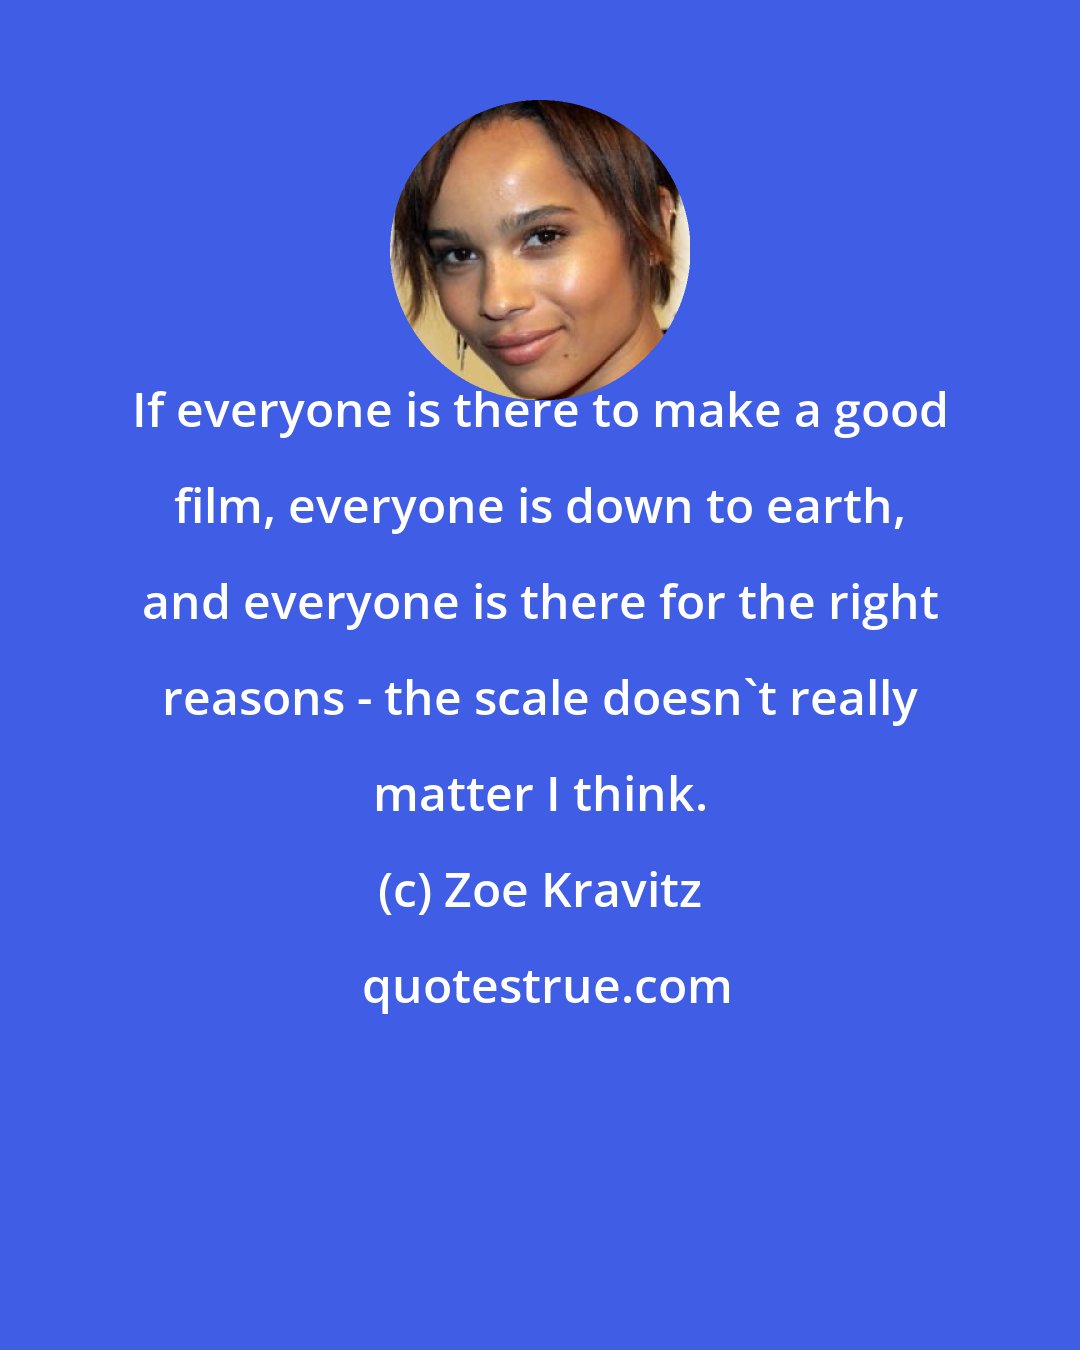 Zoe Kravitz: If everyone is there to make a good film, everyone is down to earth, and everyone is there for the right reasons - the scale doesn't really matter I think.